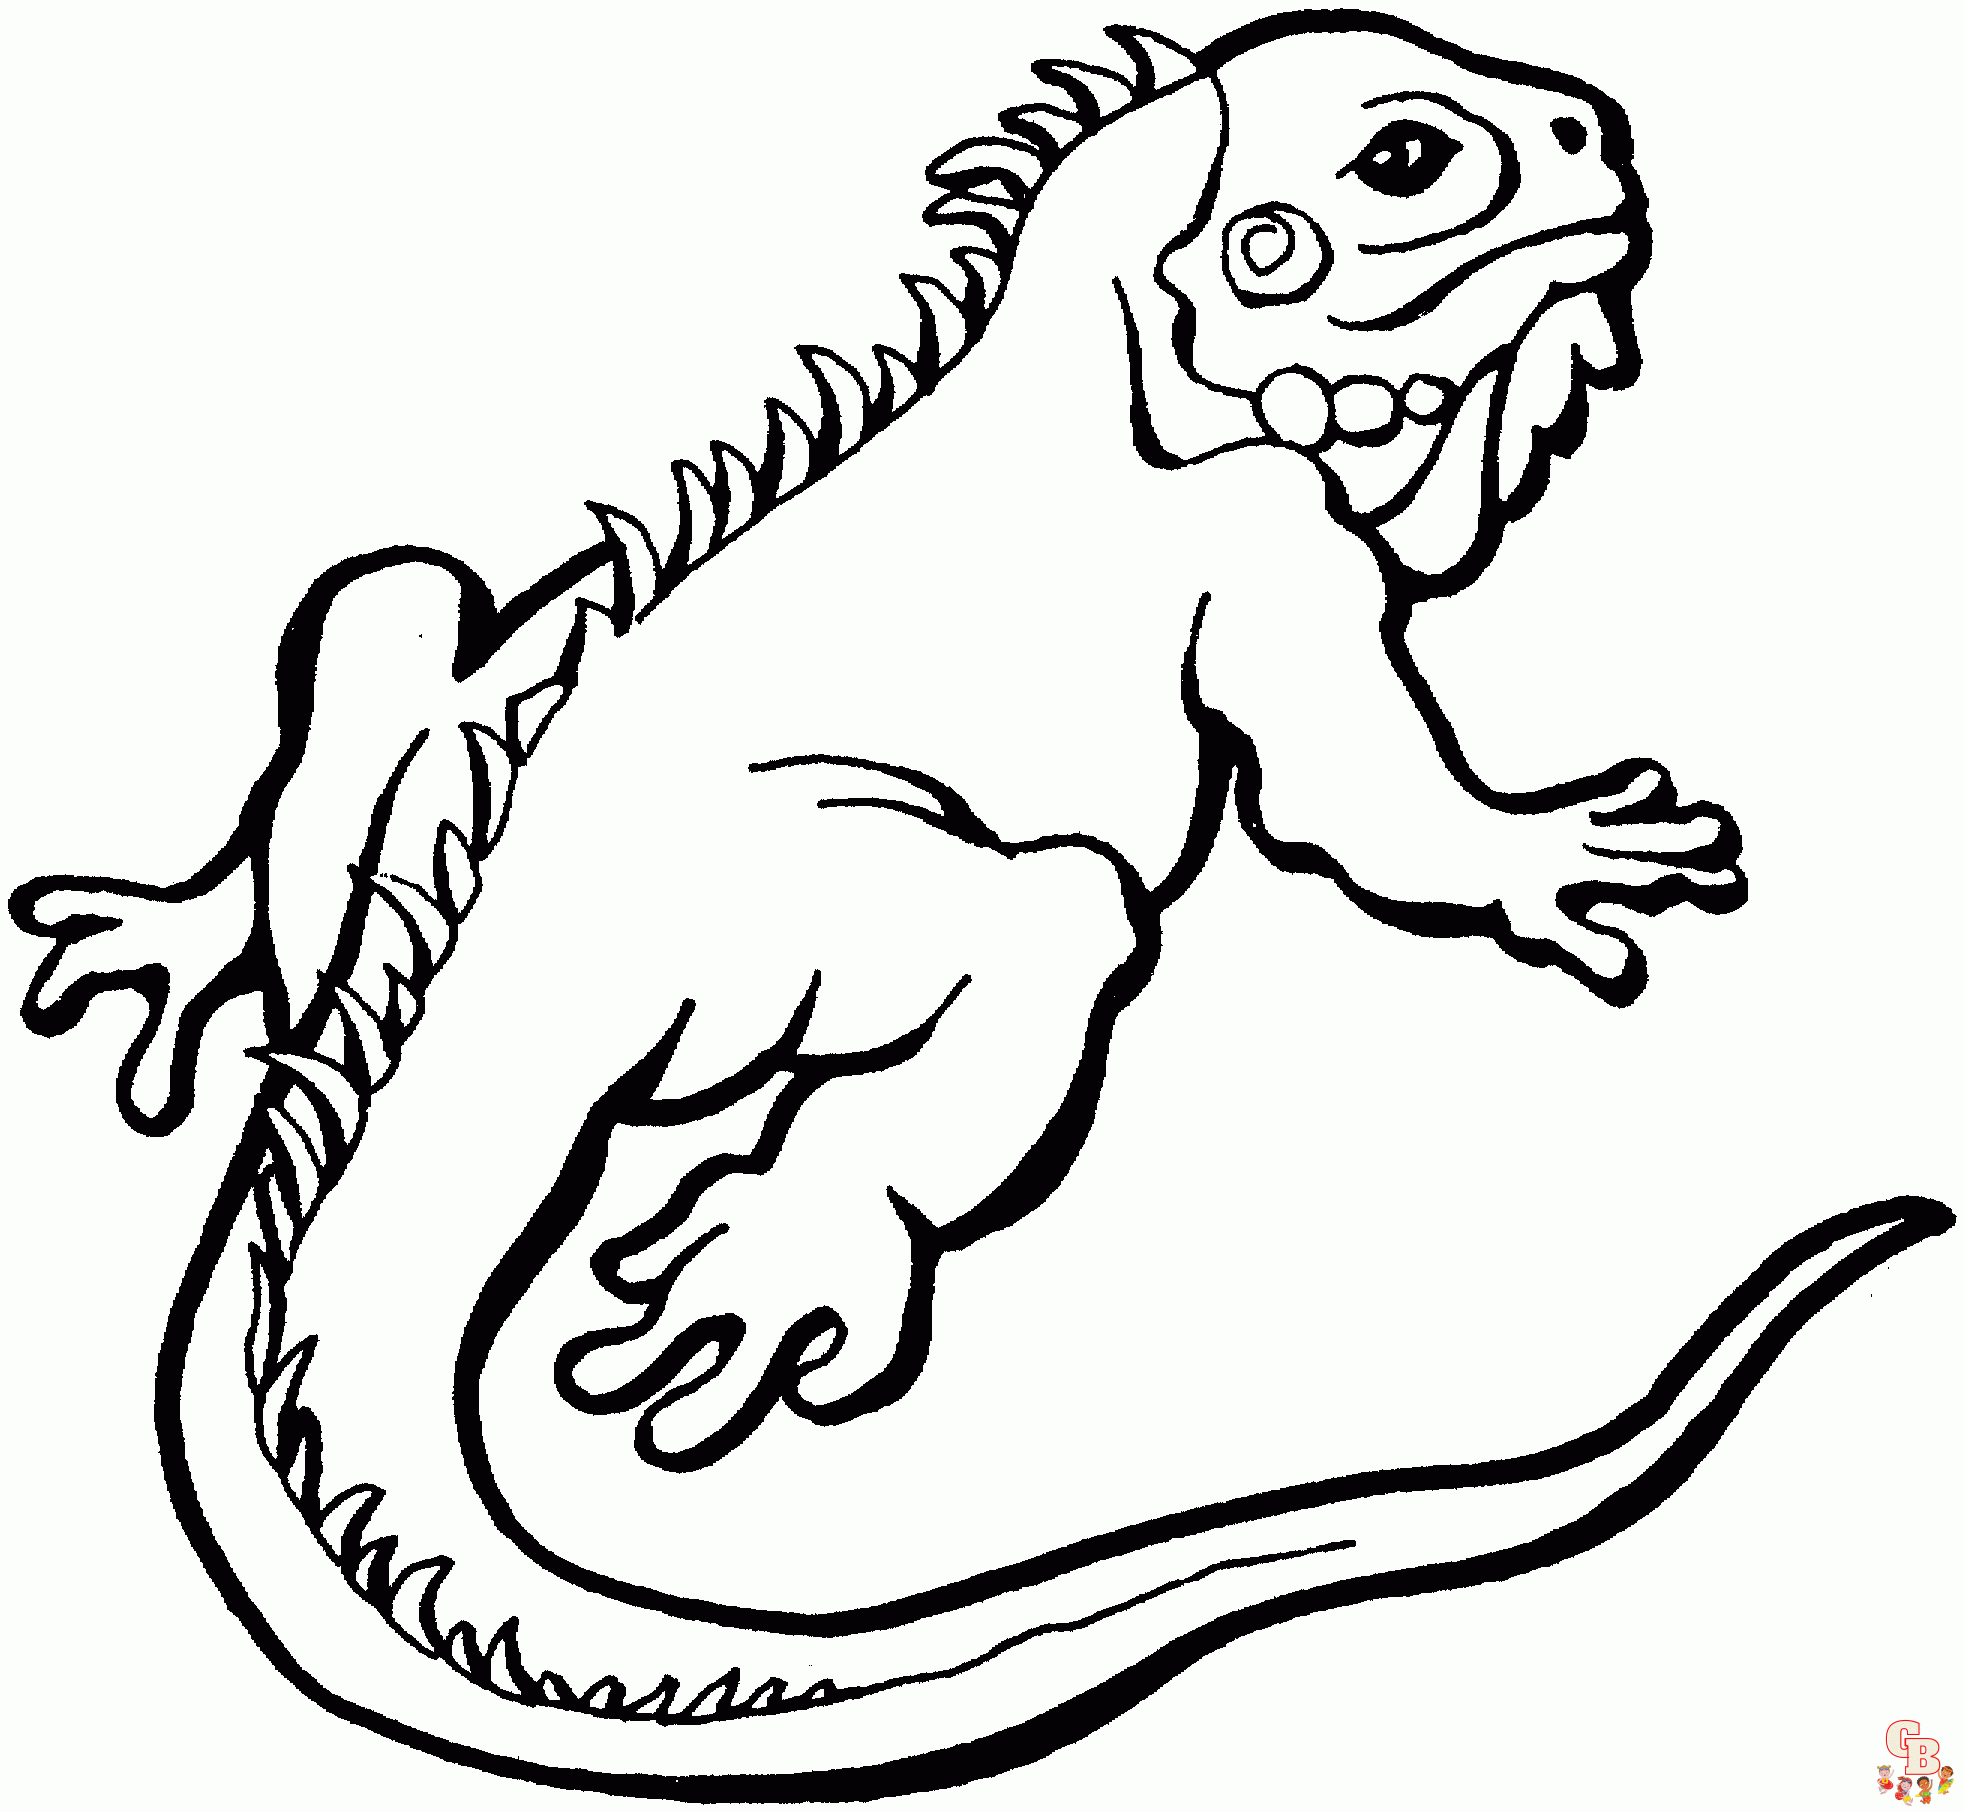 Reptile Coloring Pages 3